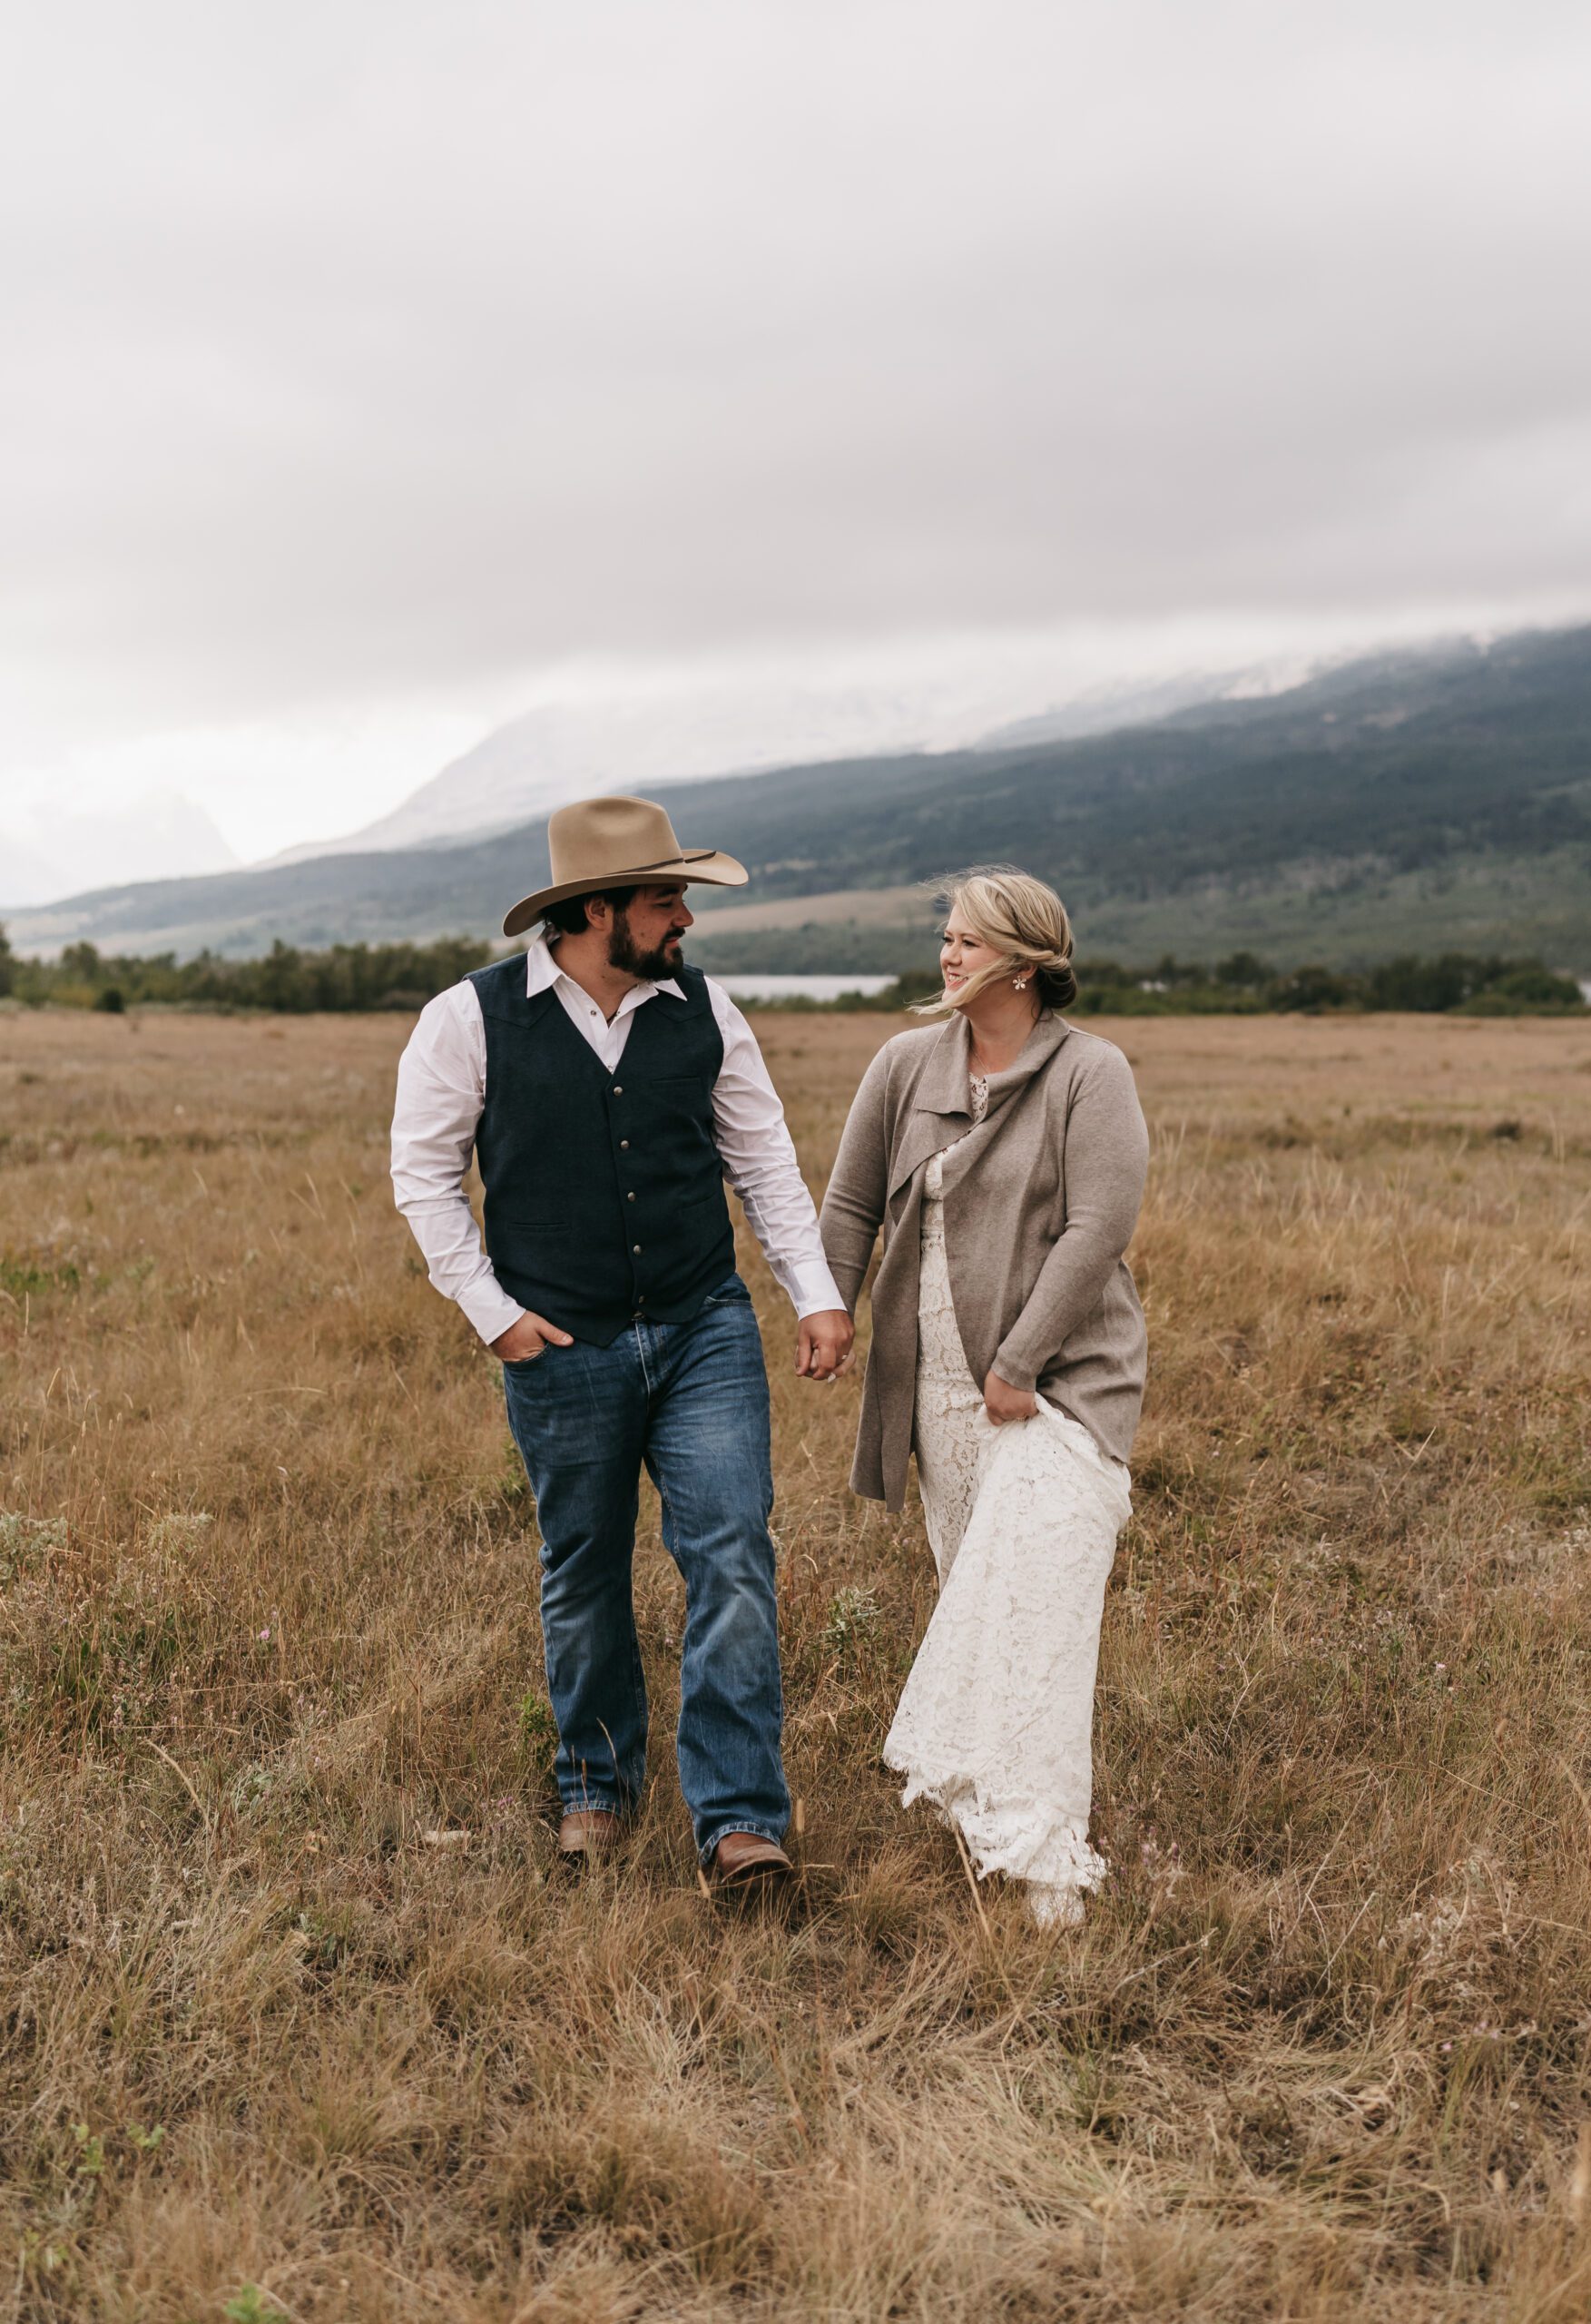 What to splurge on vs. what to save on for your elopement cover photo